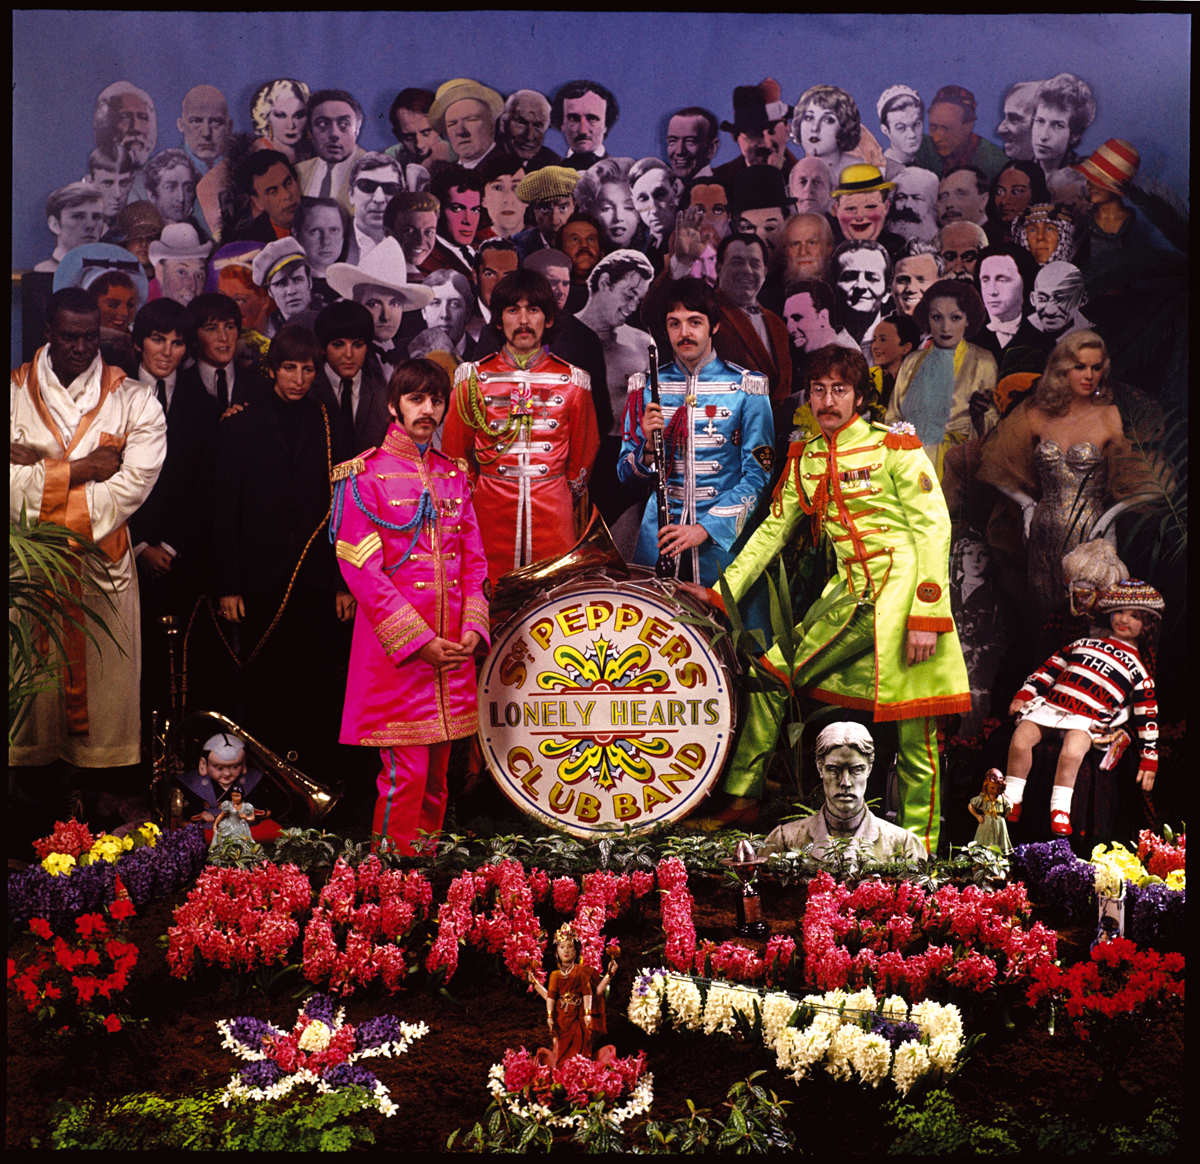 Sgt. Pepper released